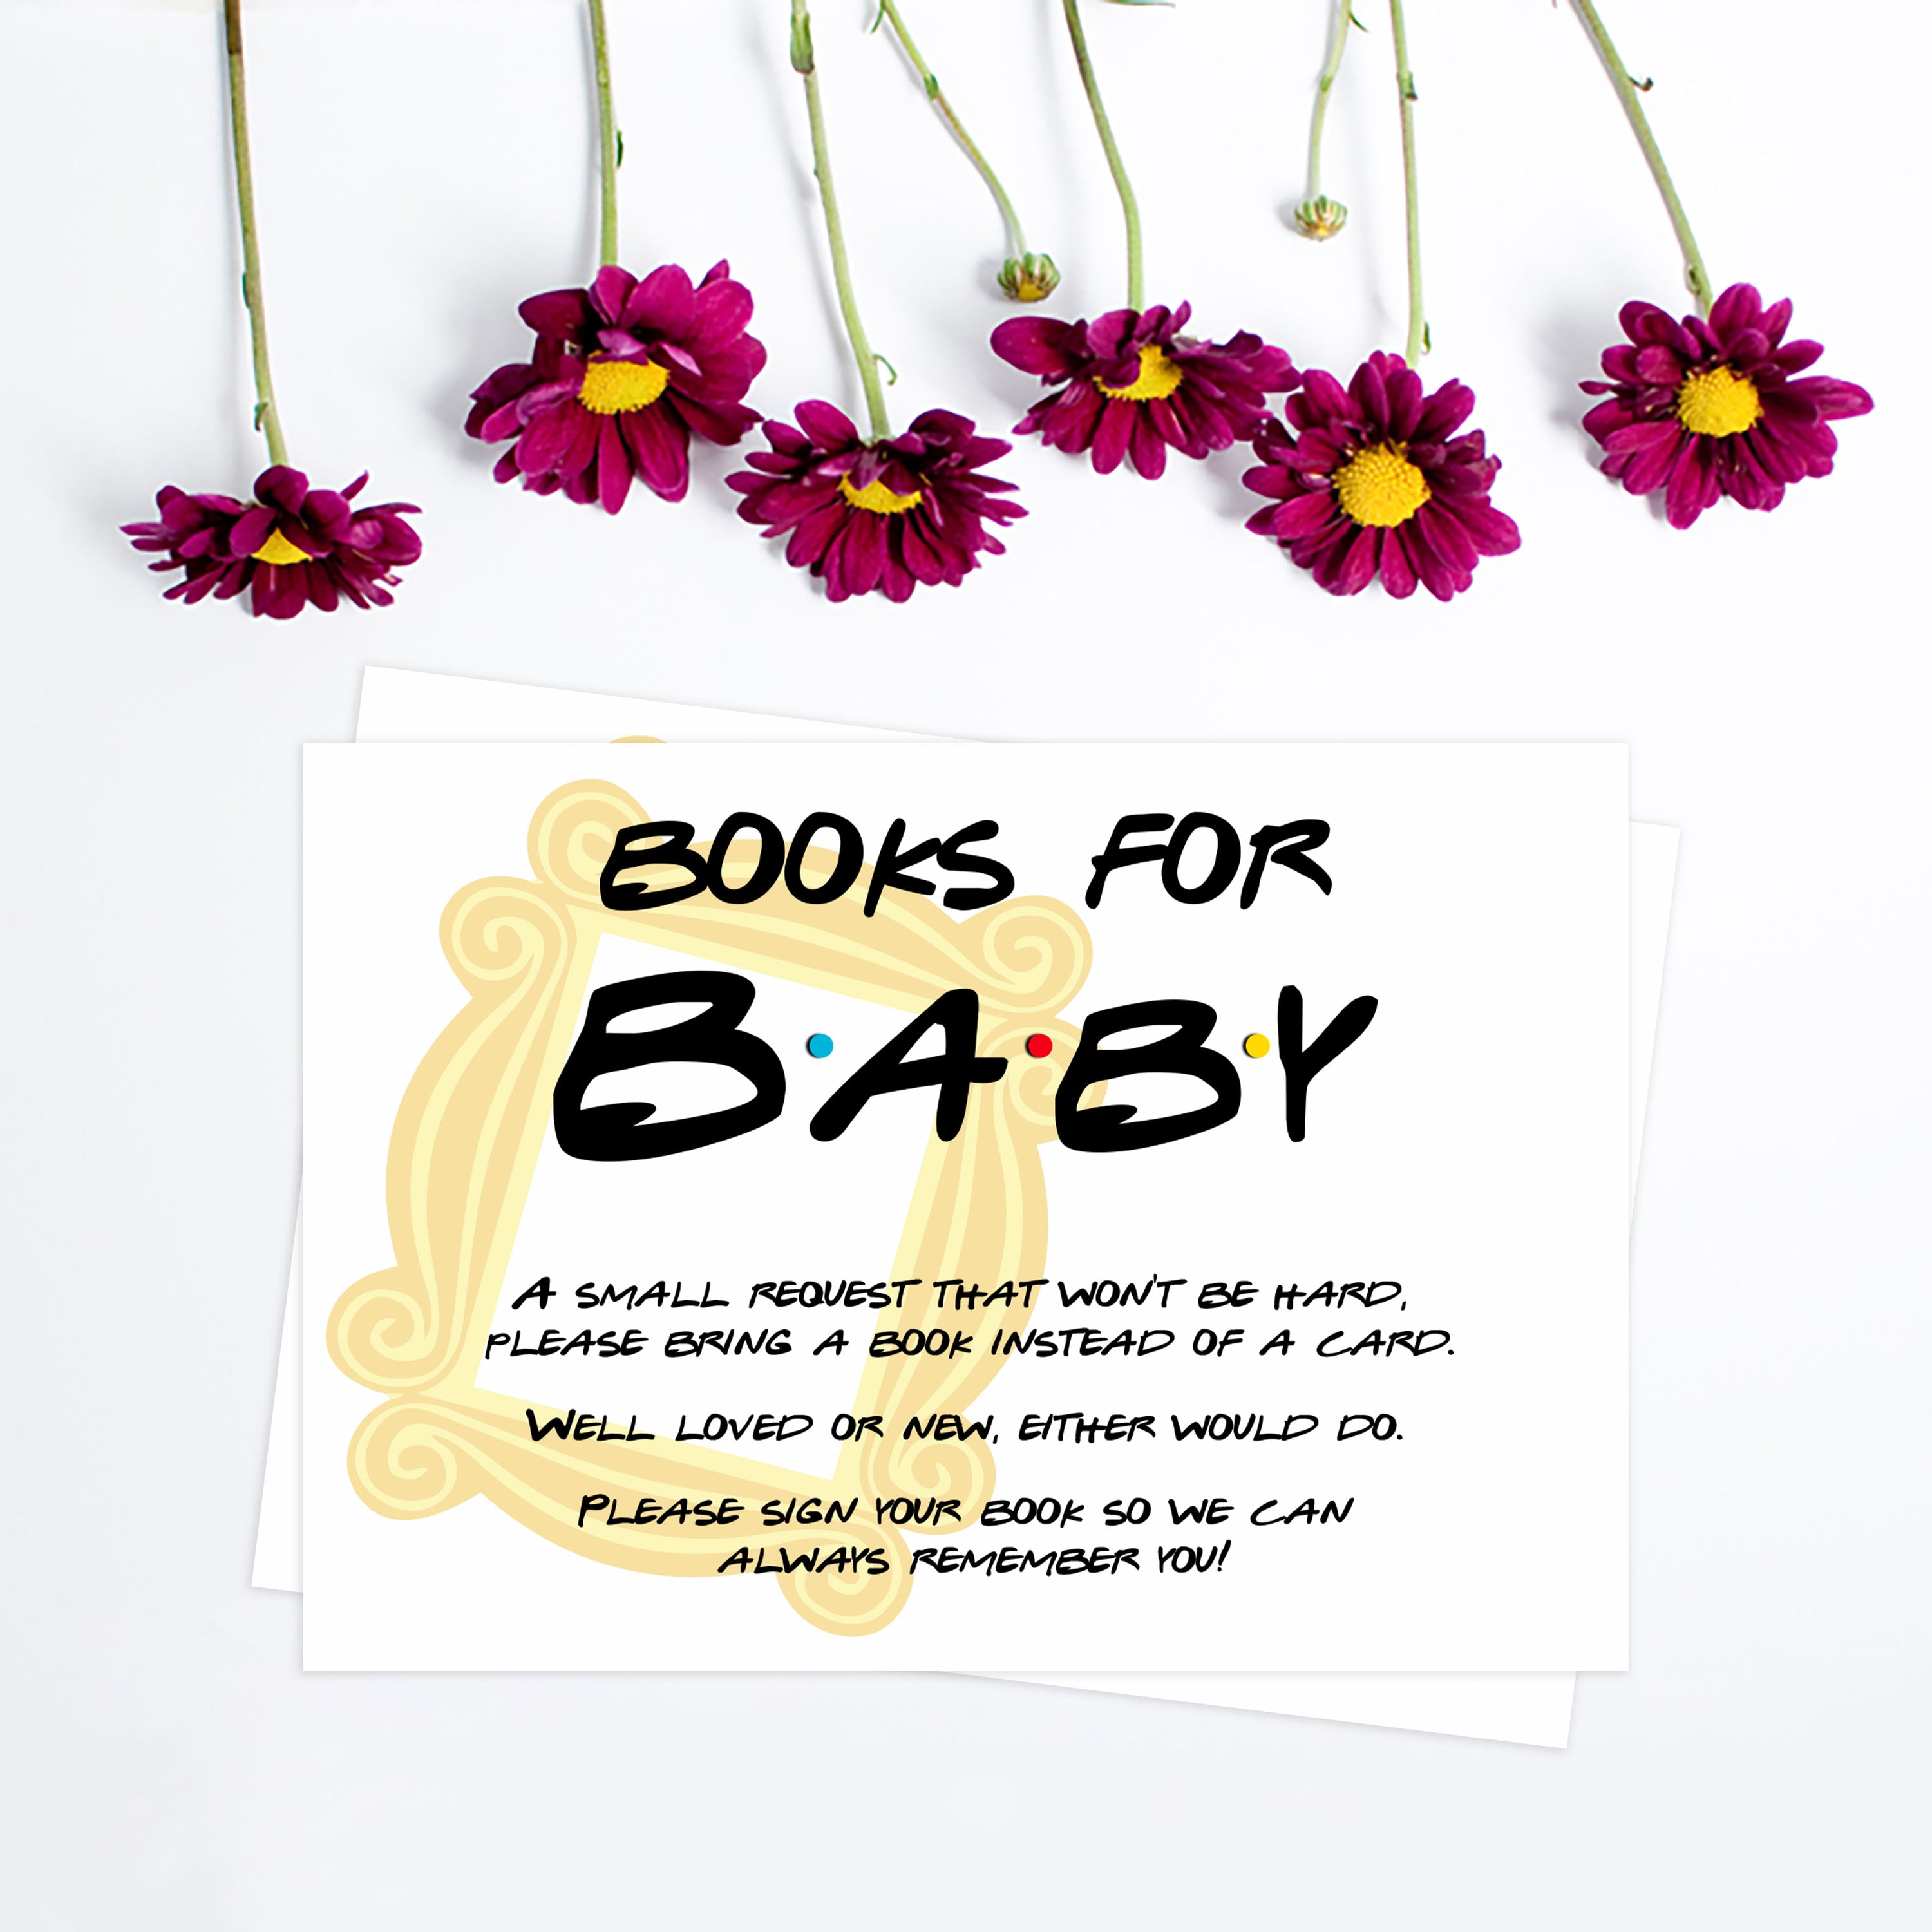 books for baby, bring a book insert, Printable baby shower games, friends fun baby games, baby shower games, fun baby shower ideas, top baby shower ideas, friends baby shower, friends baby shower ideas